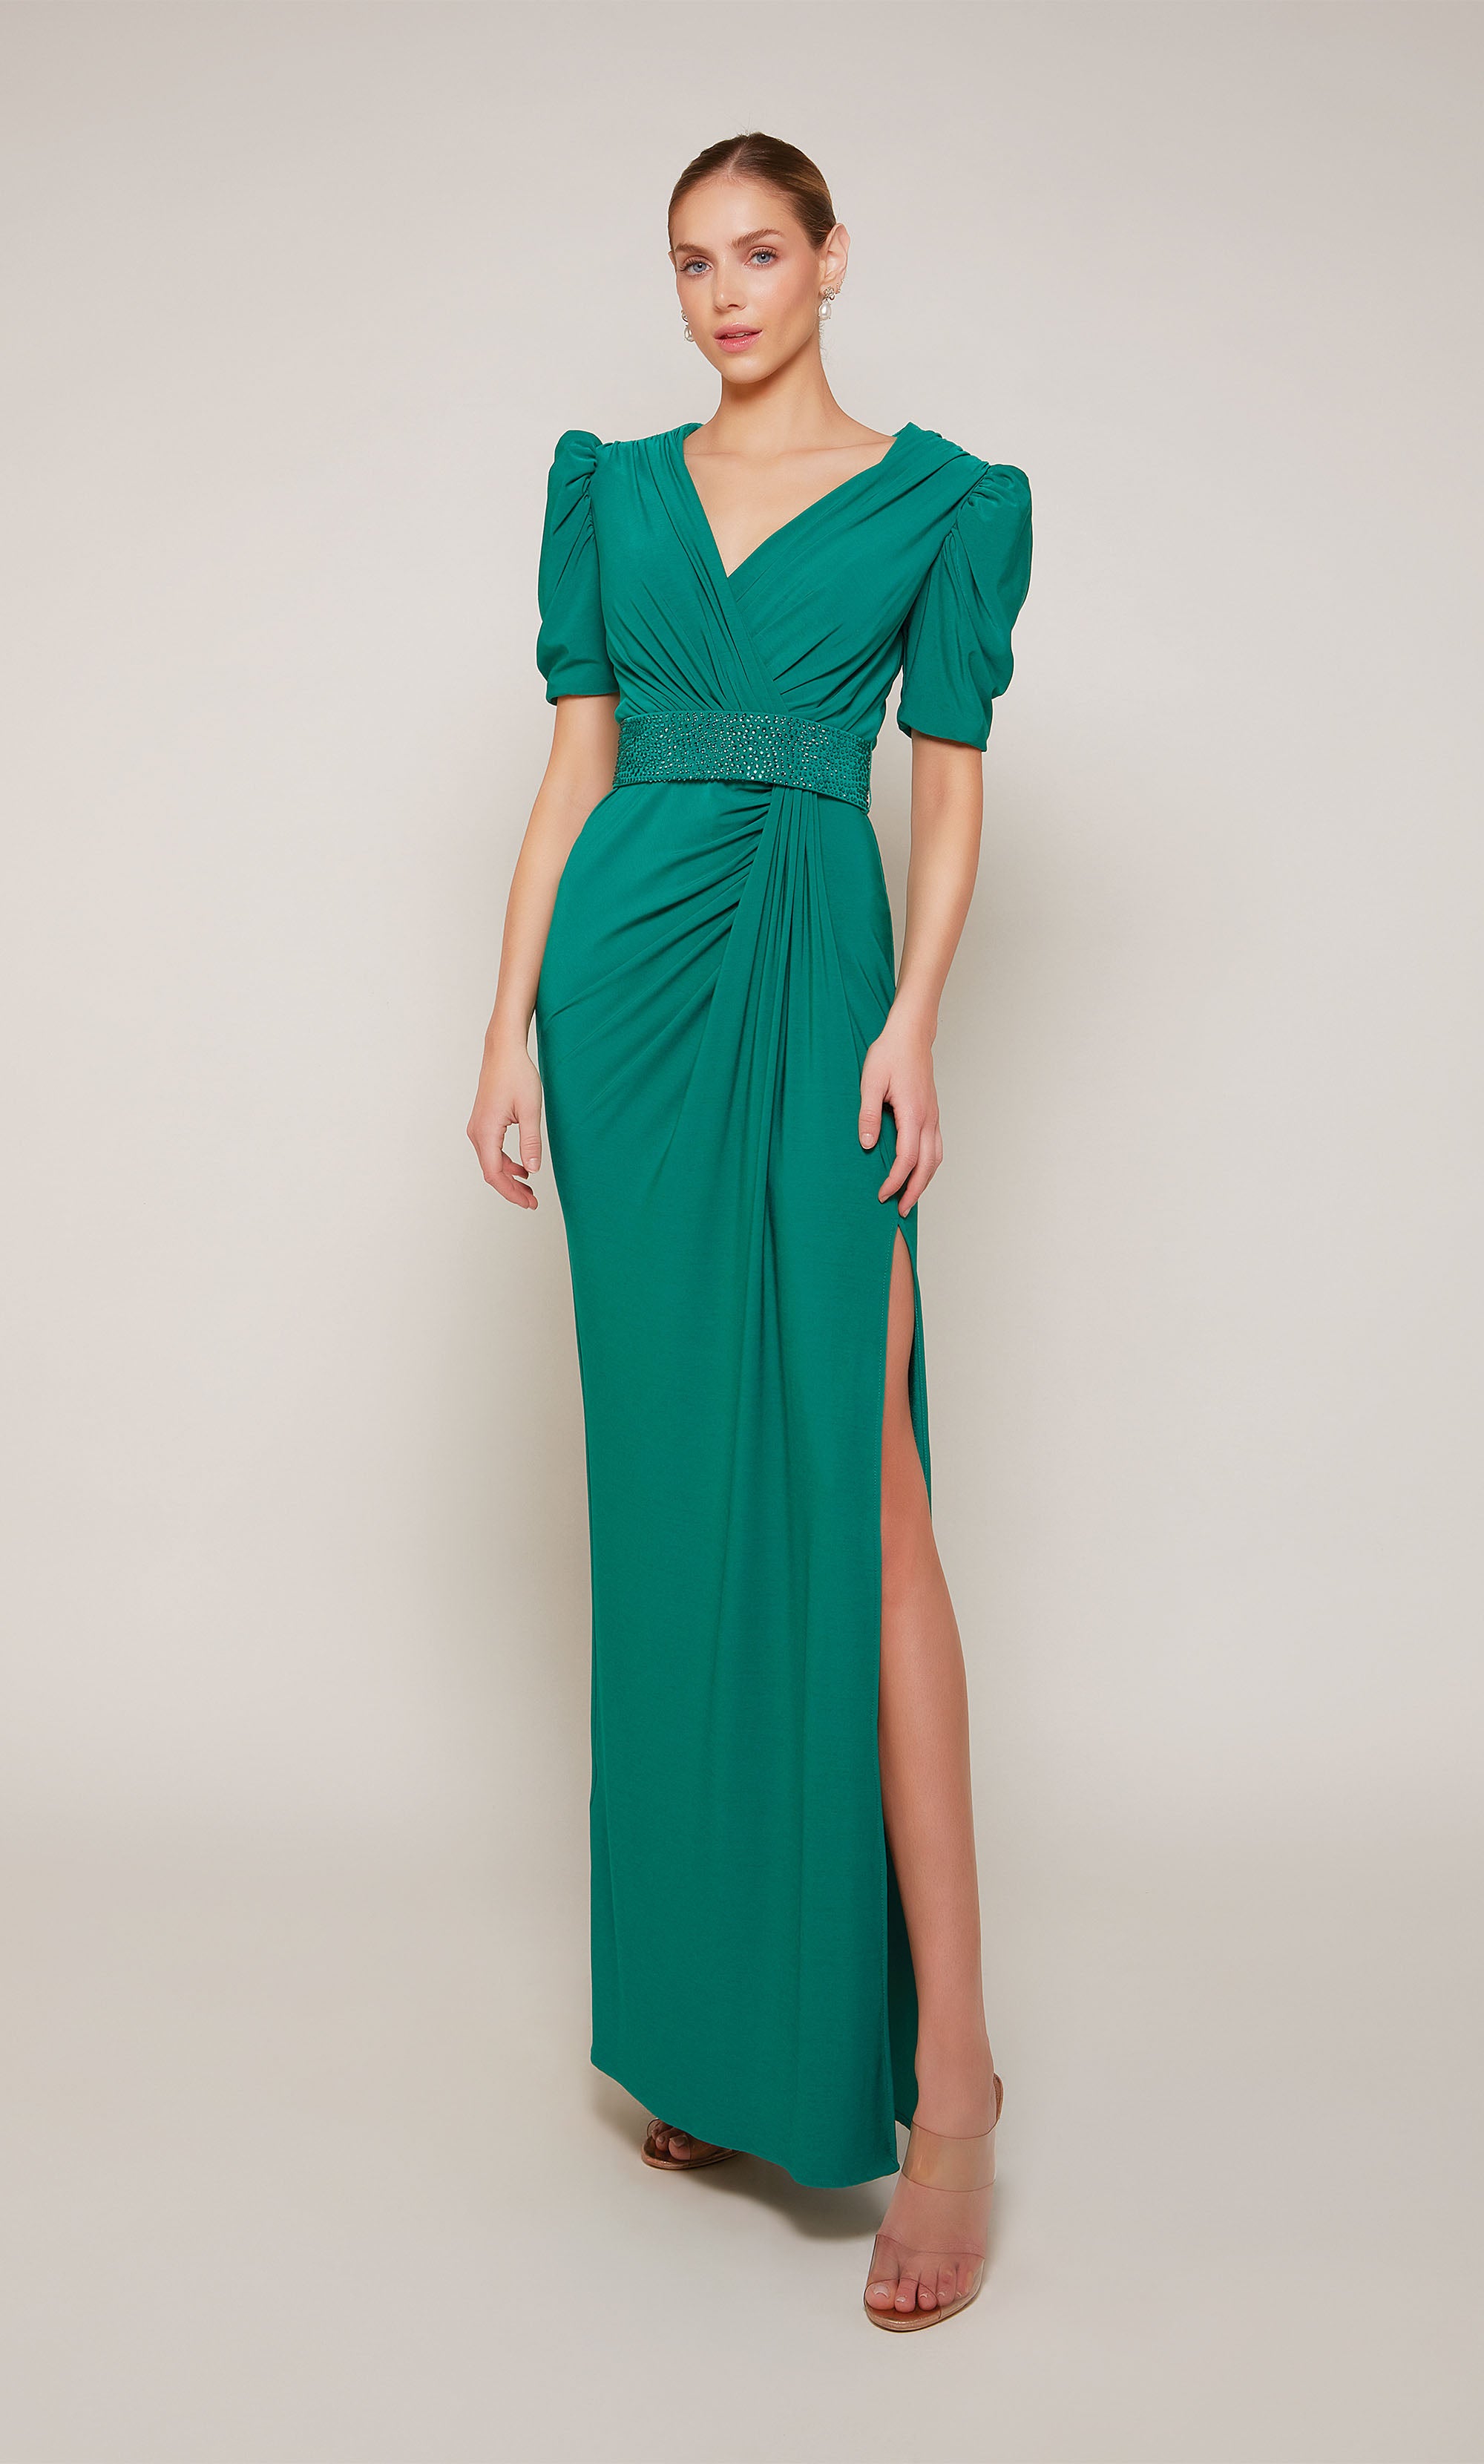 An emerald evening gown with puff sleeves, a V-neckline, an embellished belt, and elegant side slit.